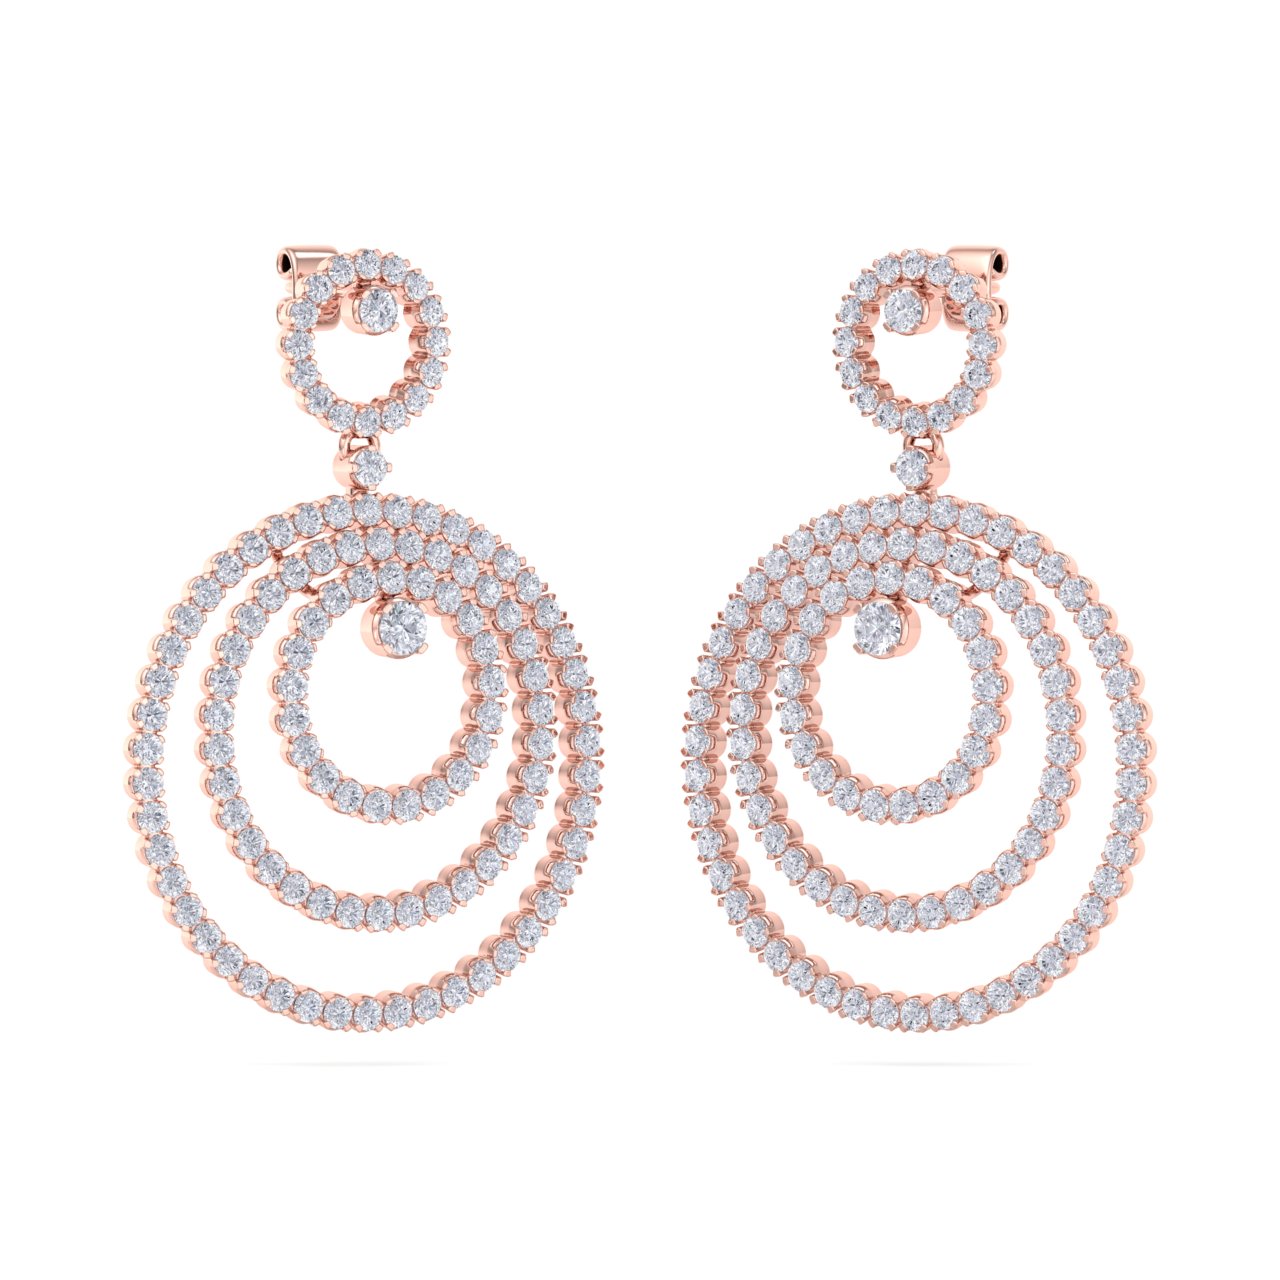 Chandelier earrings in white gold with white diamonds of 8.44 ct in weight